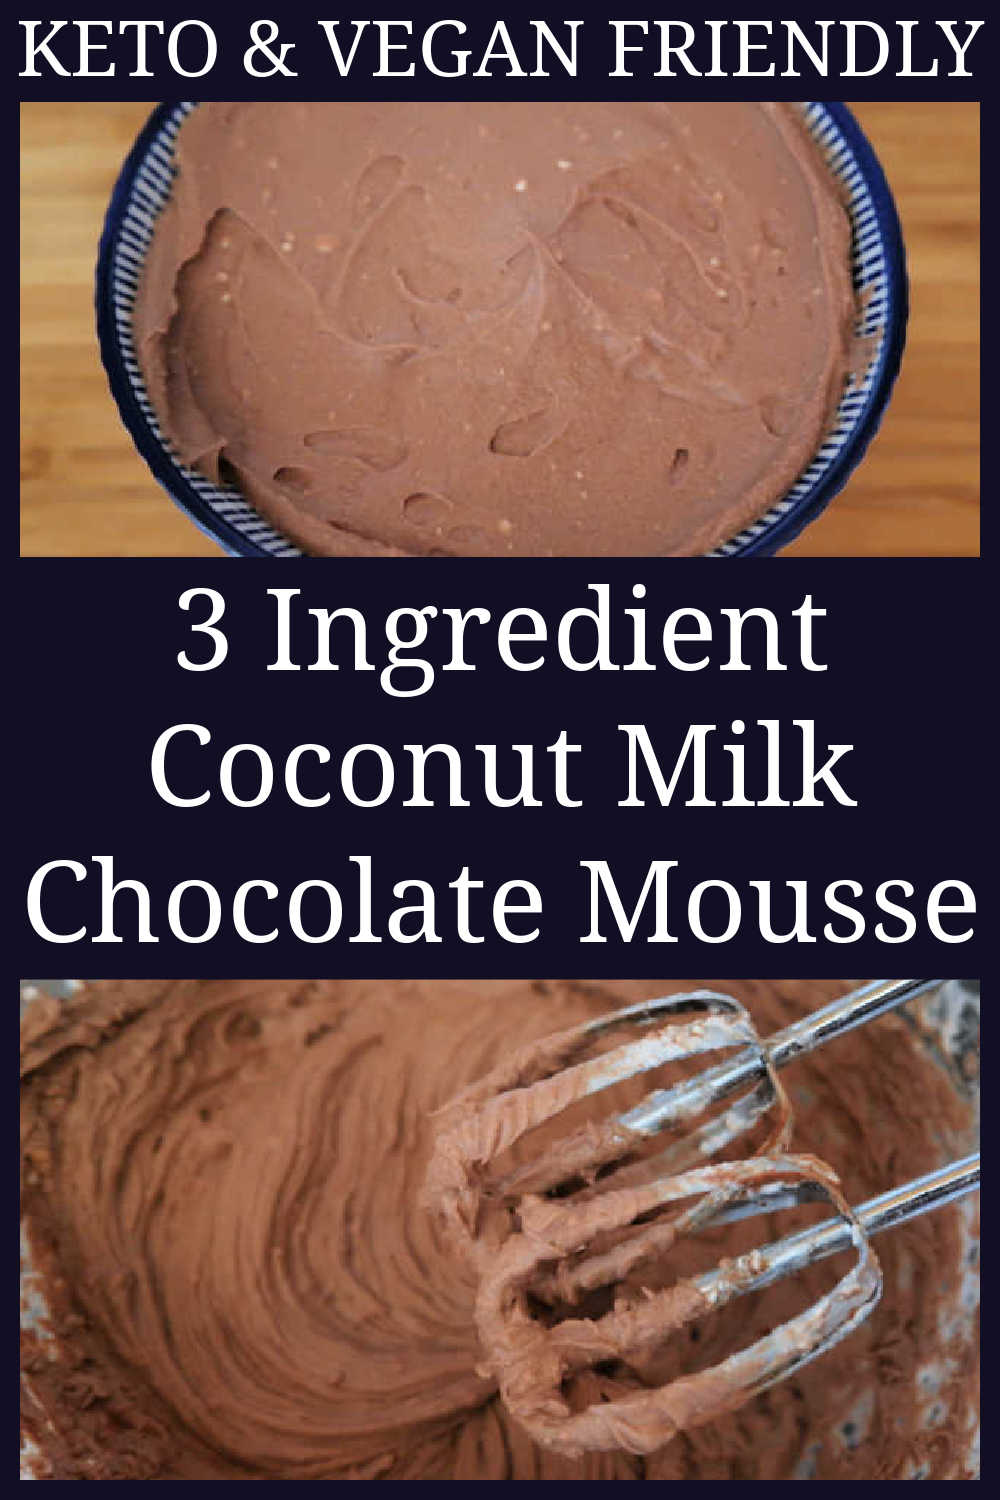 Coconut Milk Chocolate Mousse Recipe - How to make the best easy low carb, keto, dairy-free, paleo and vegan friendly dessert with only 3 ingredients - with the full video tutorial.